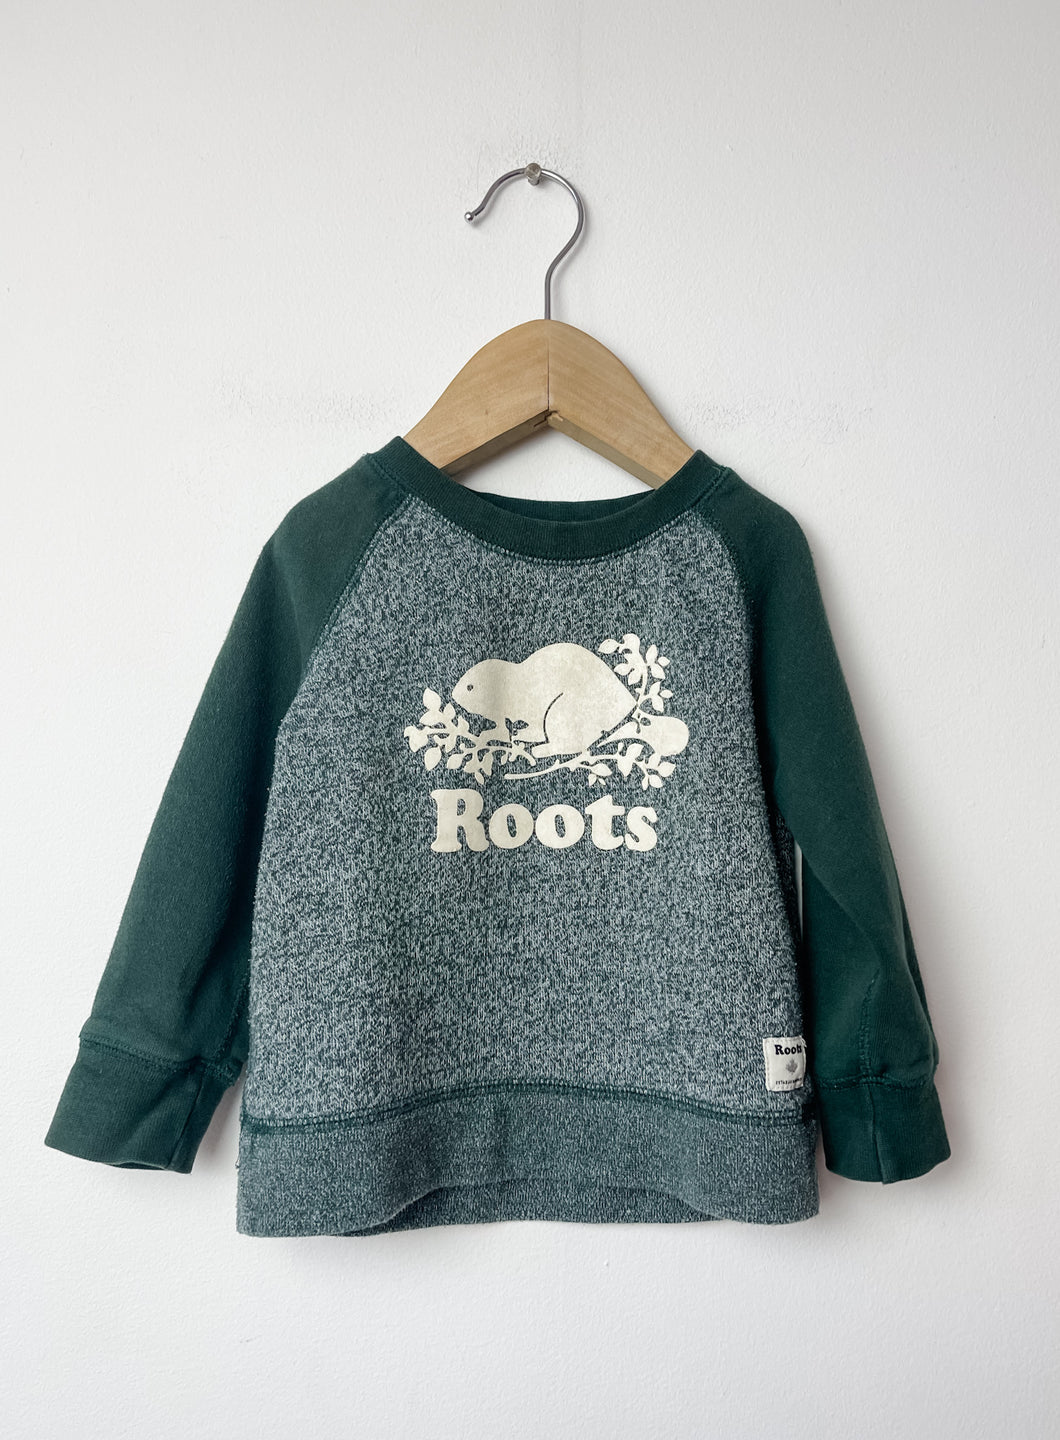 Kids Green Roots Sweater Size 12-18 Months